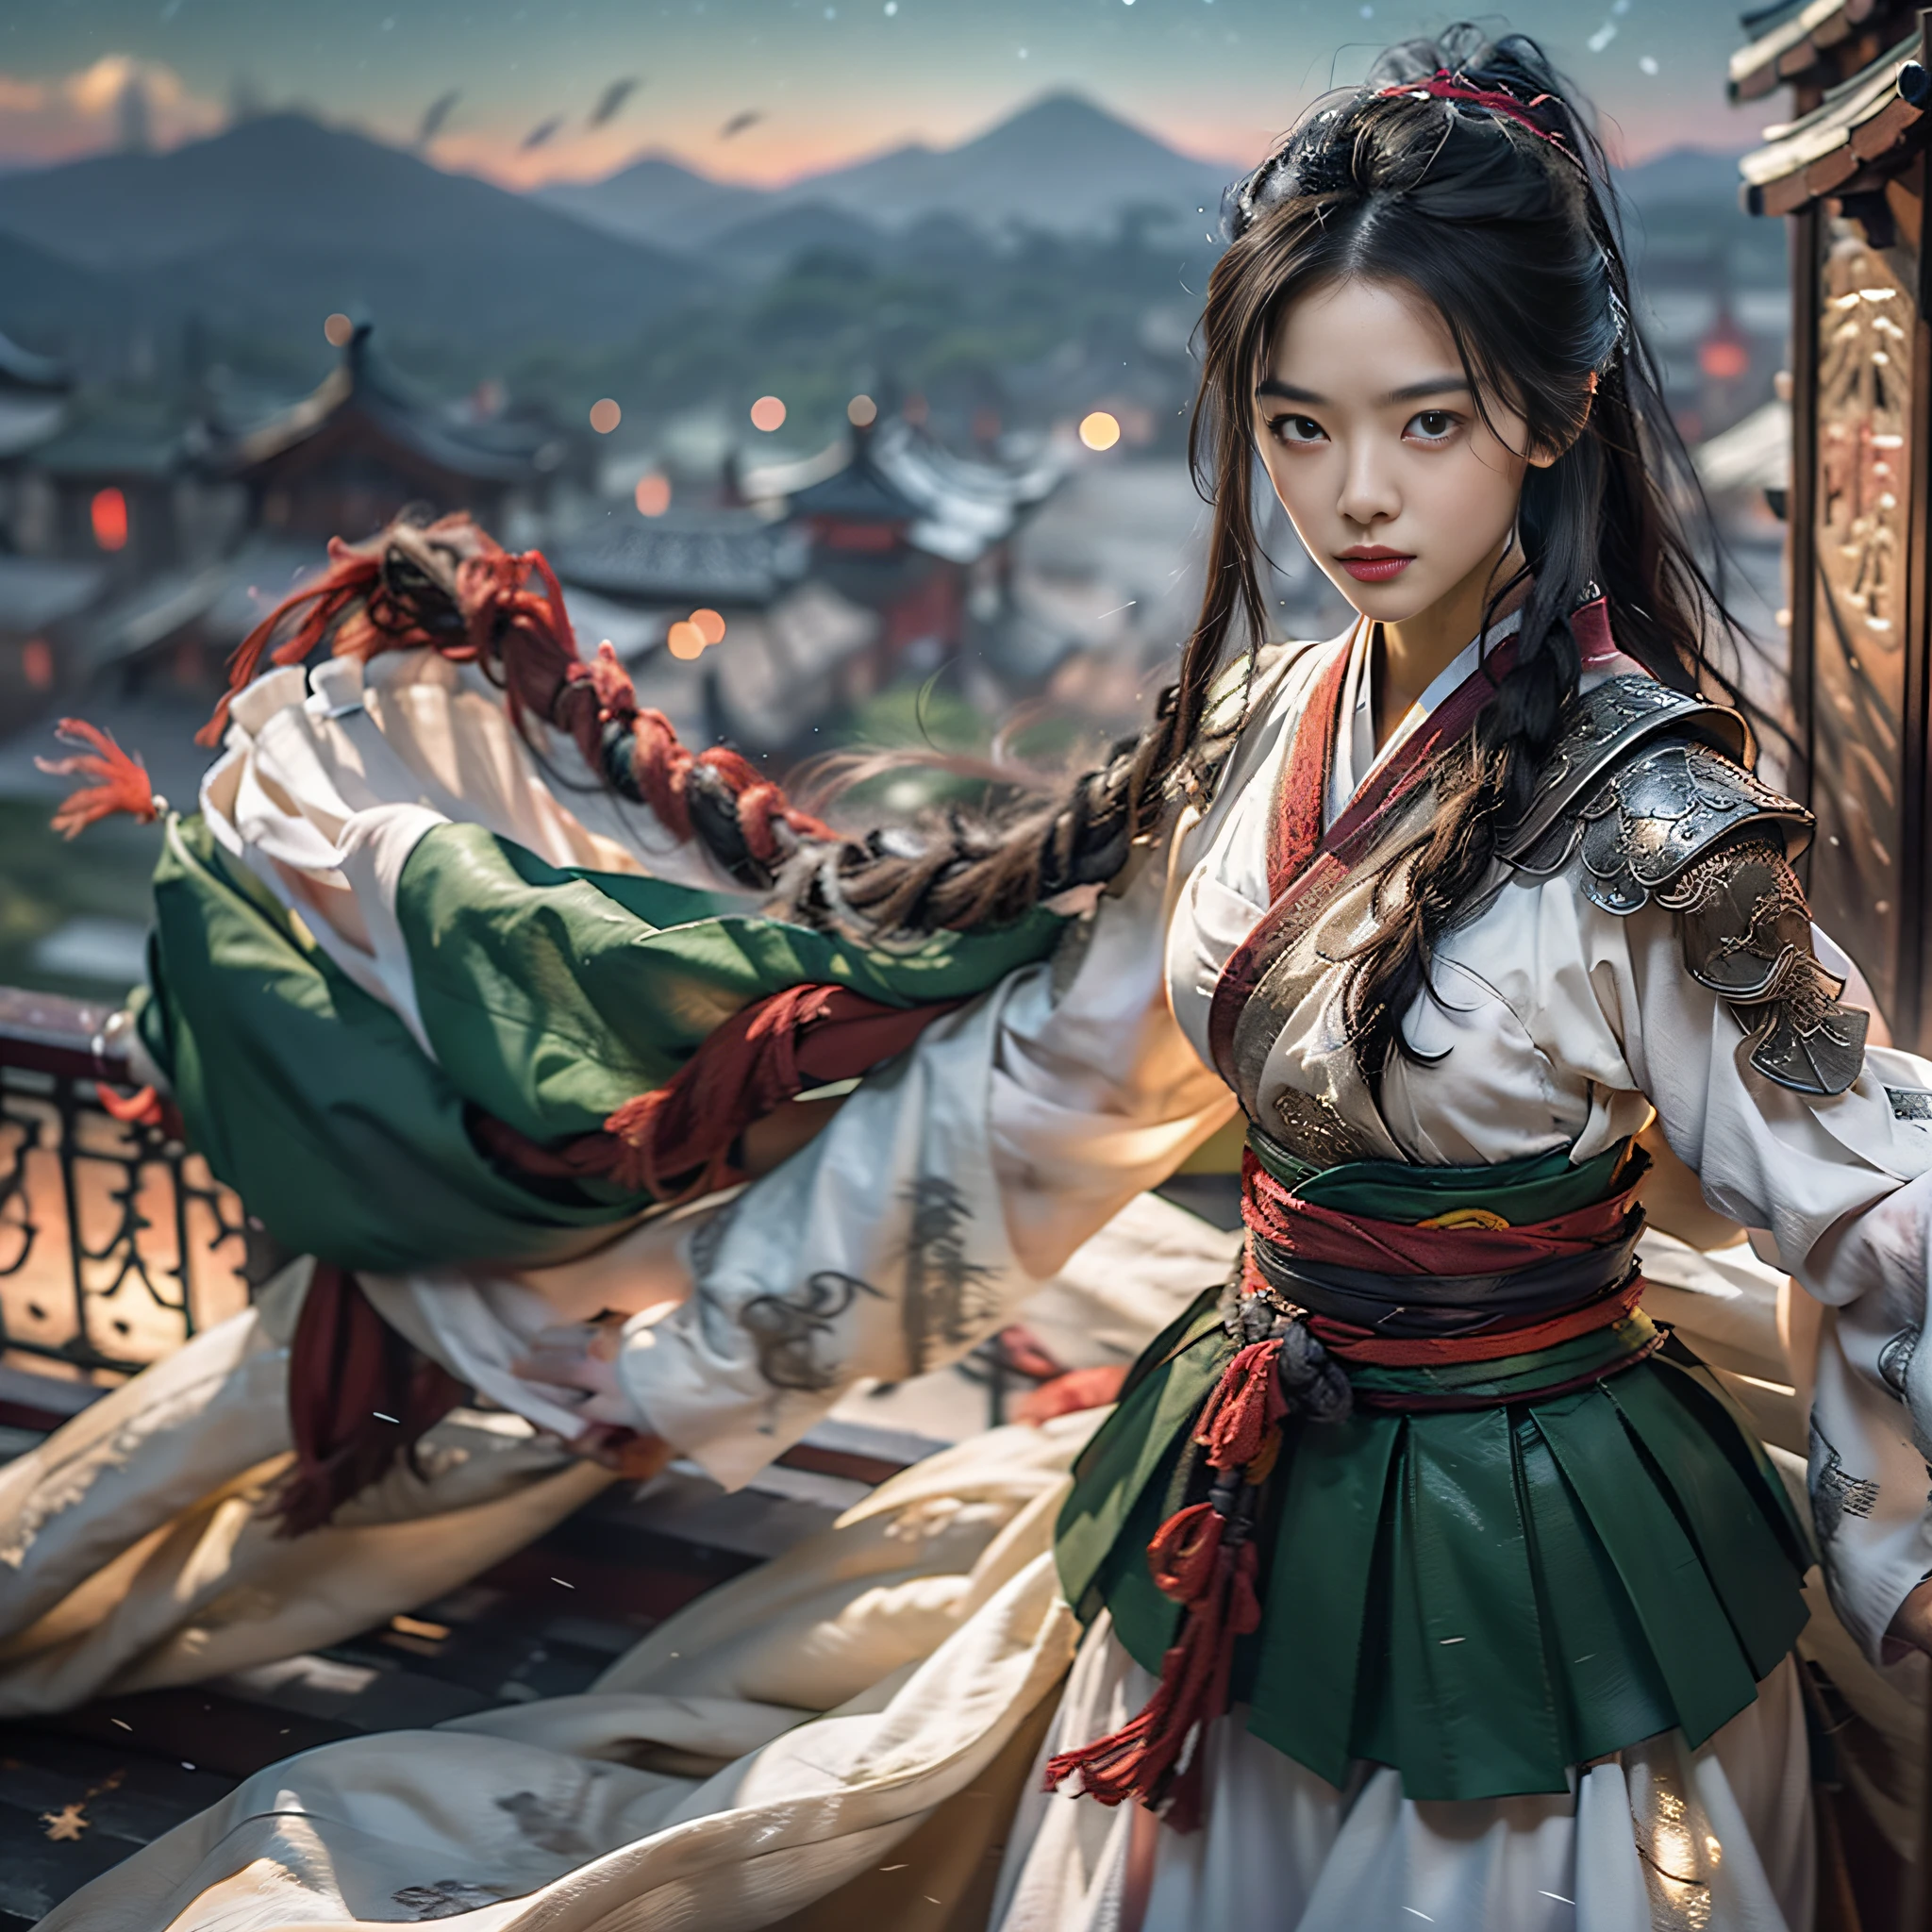 1 girl, (mature girl), slightly chubby, female warrior, Mulan, anime girl, anime role play, realistic role play, willow eyebrows, beautiful appearance, handsome, yellow eyes, smile, brunette hair, yellow eyes, raised eyebrows, short ponytail, (short ponytail), translucent skirt, long skirt, cotton skirt, (dark green skirt), belt, shoulder armor, cape, standing, black hair, long eyelashes, solid round eyes, red ears, fragrant, background blur, starry sky background, standing on the city wall, chinese city wall, mountain range, epic, surrealism, falling shadows, super detail, accurate, stereogram, atmospheric perspective, 8k, best quality